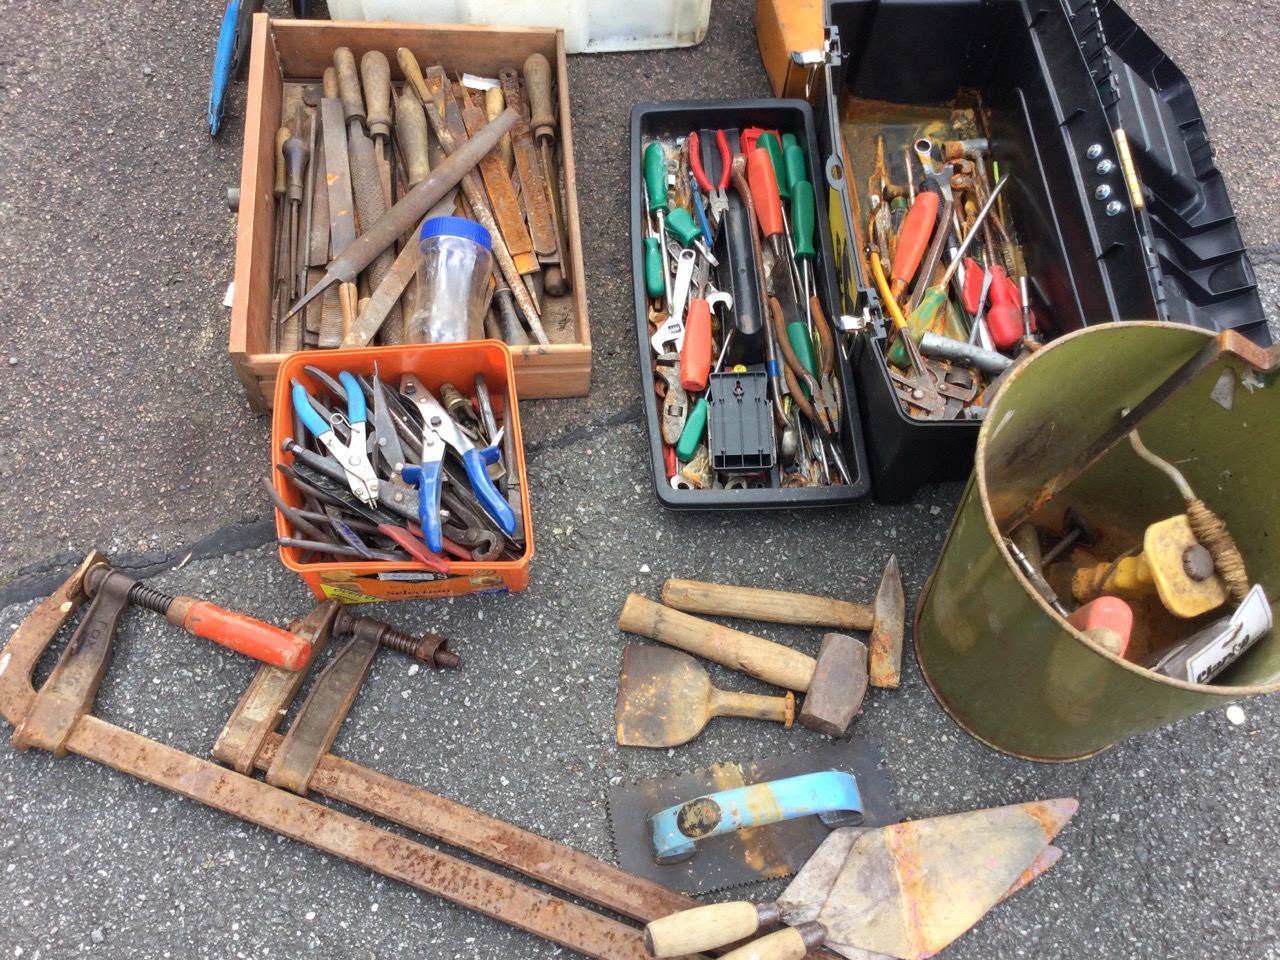 Miscellaneous hand tools including files, pliers, cutters, hammers, screwdrivers, wire brushes, - Image 3 of 3